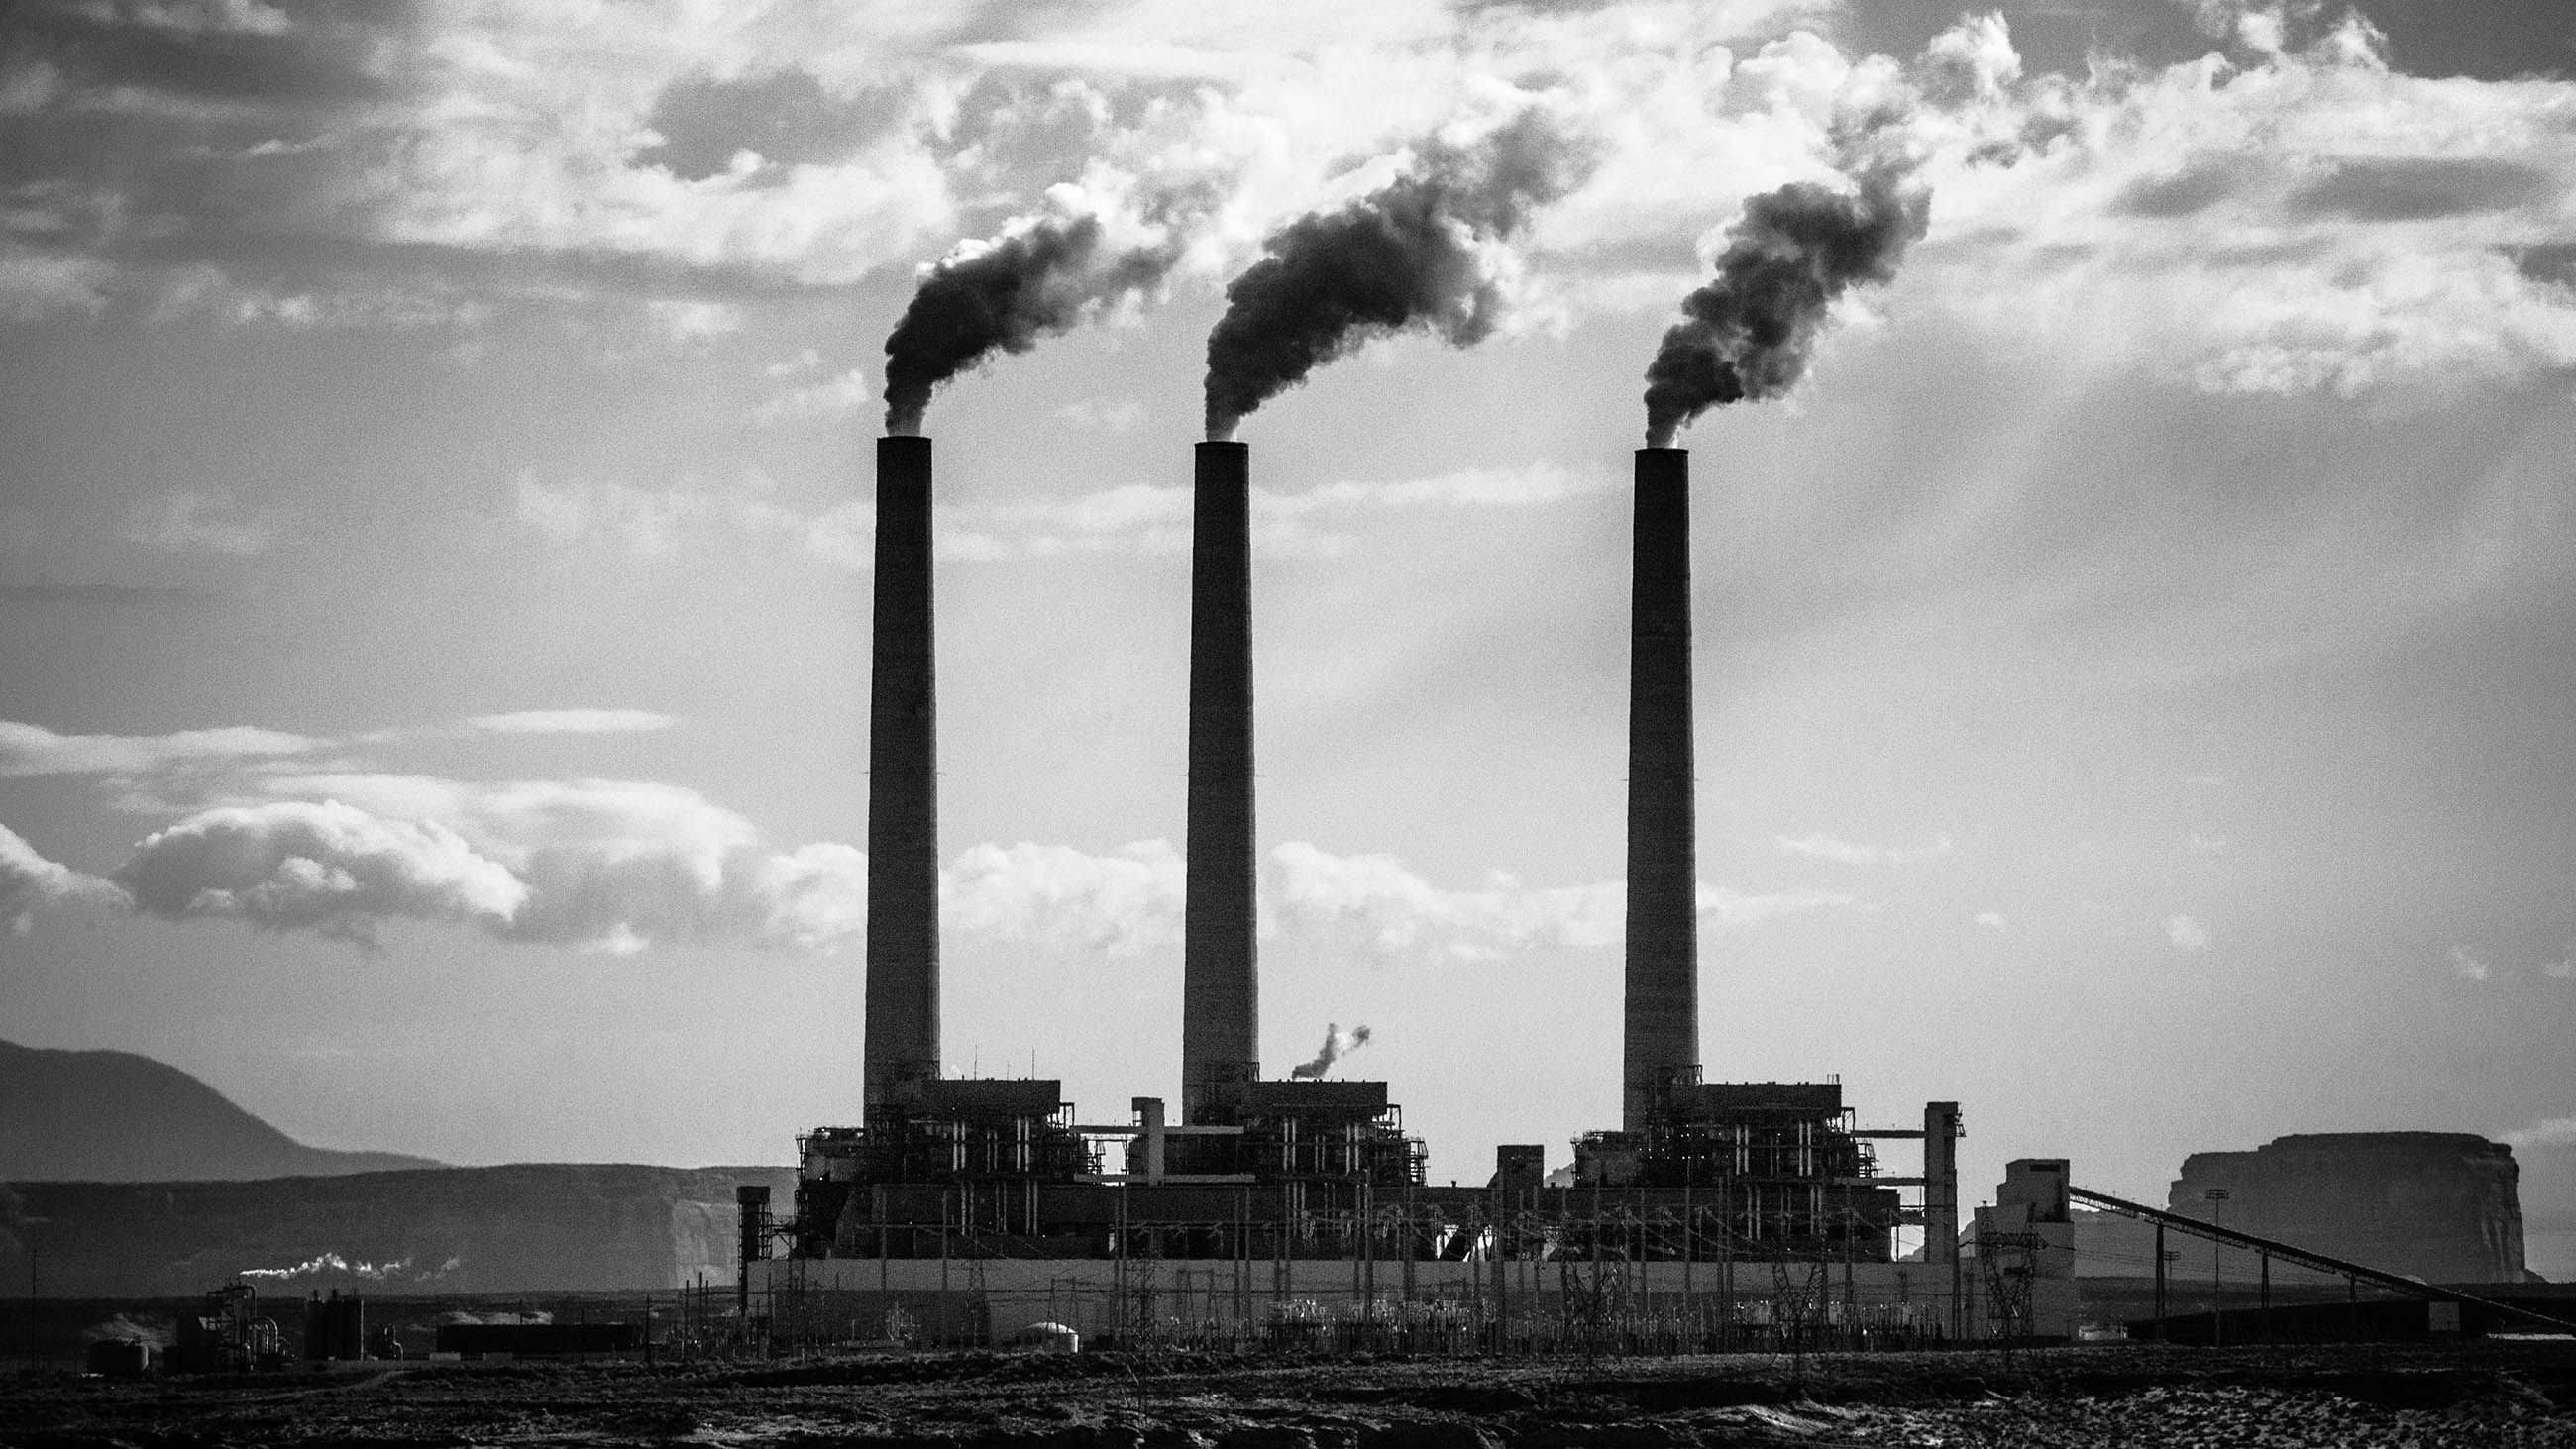 Coal-fired power generation is on the decline, but the U.S. still has millions of tons of waste byproducts to deal with.